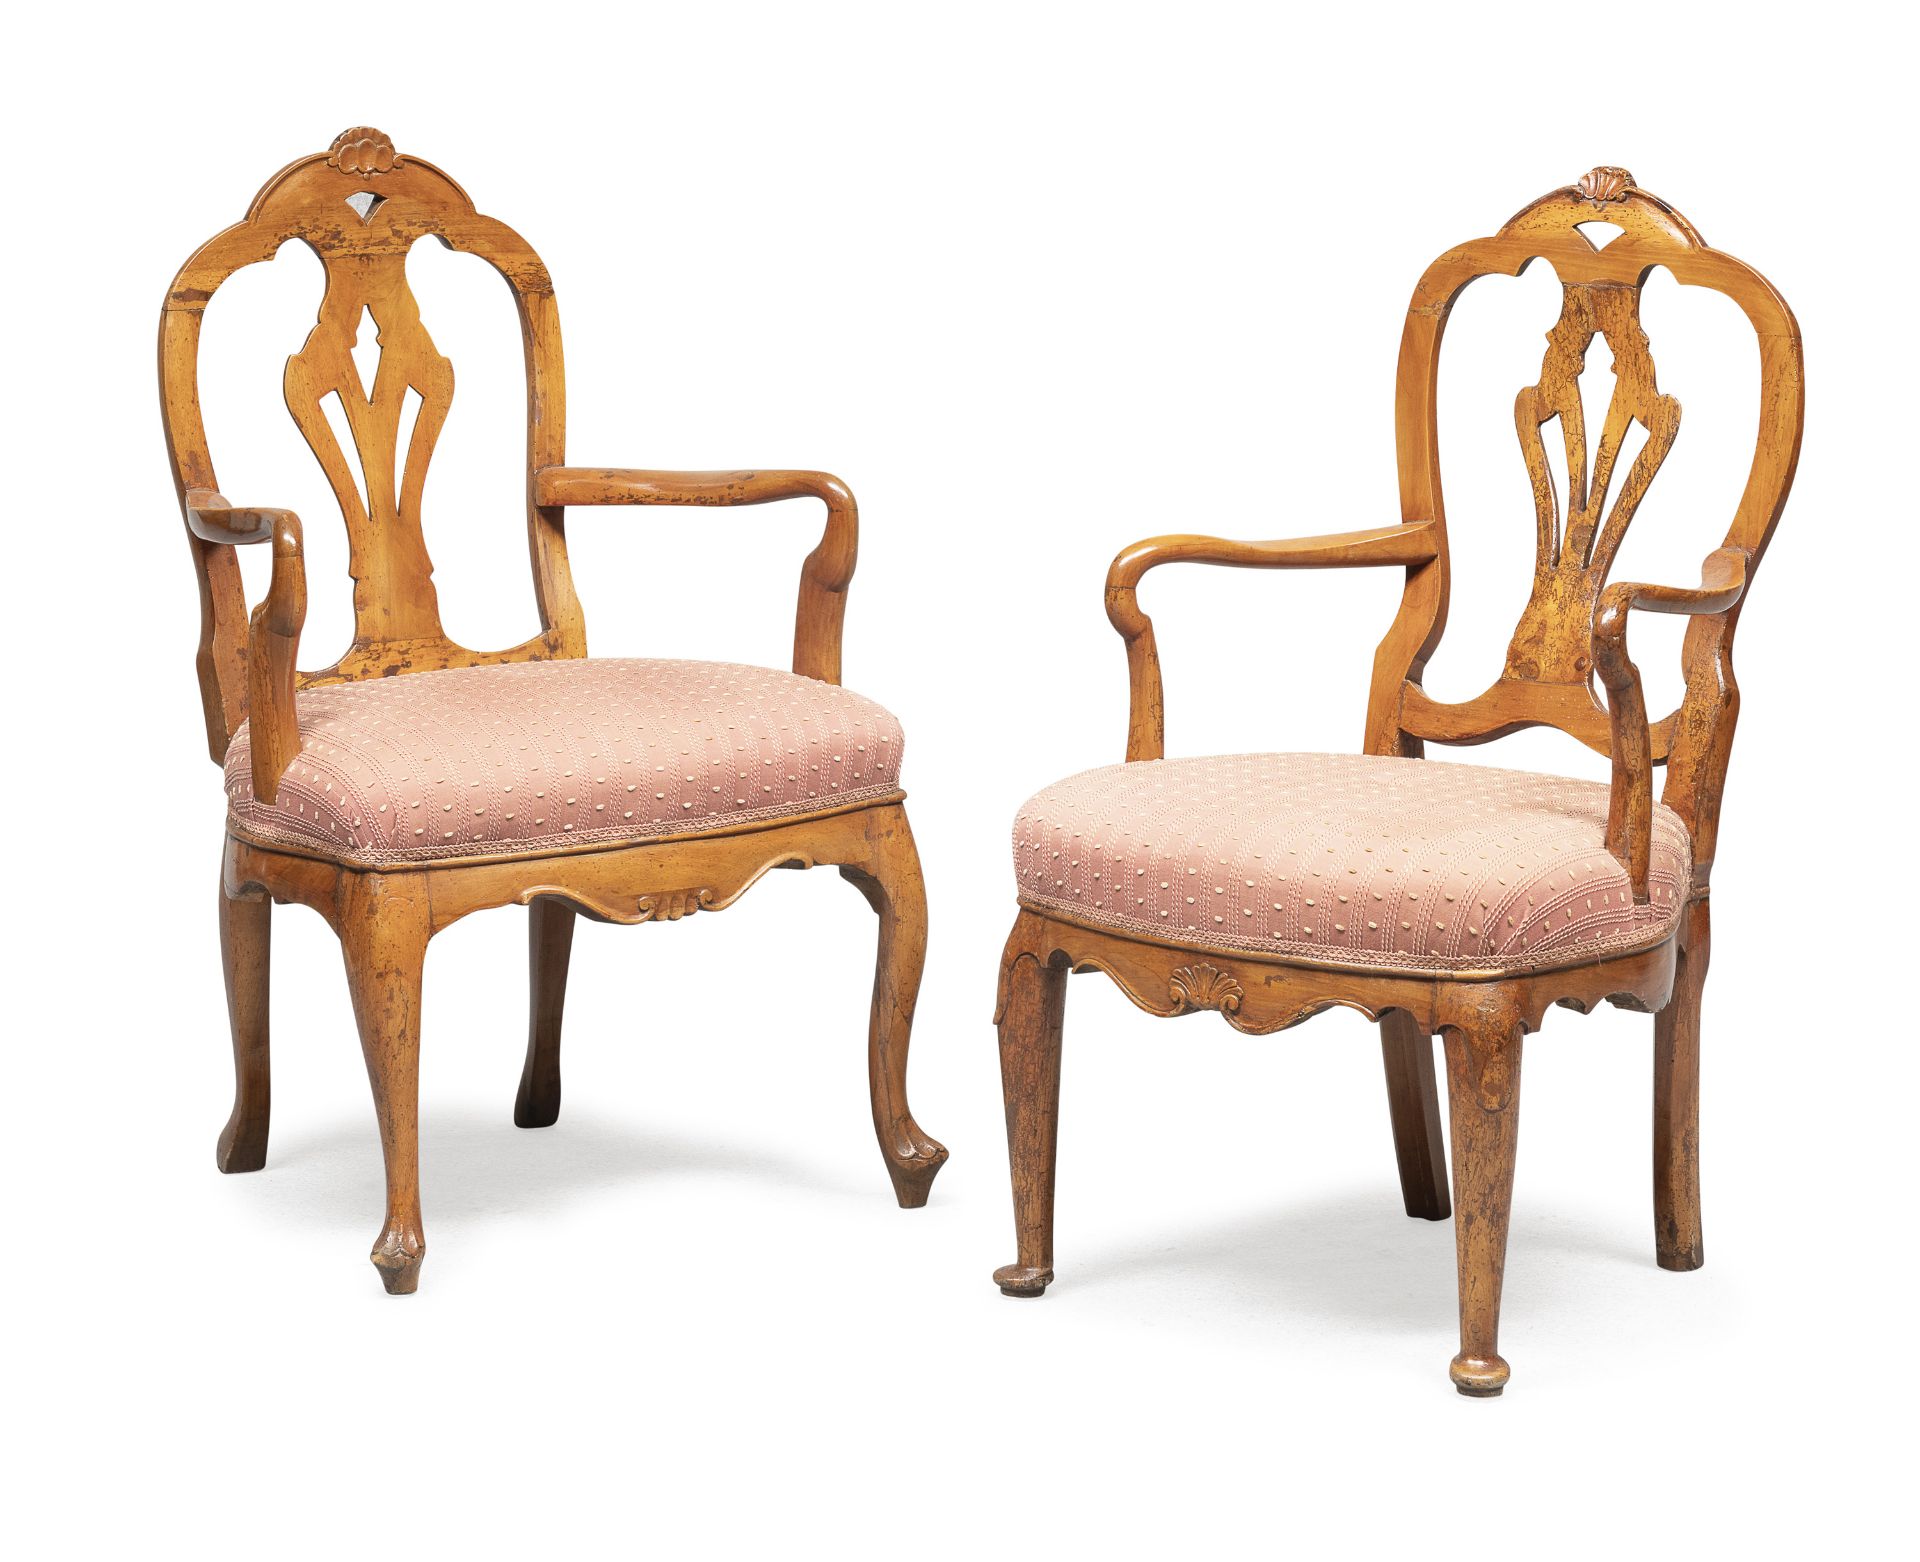 TWO CHERRY ARMCHAIRS PIEDMONT LATE 18th CENTURY